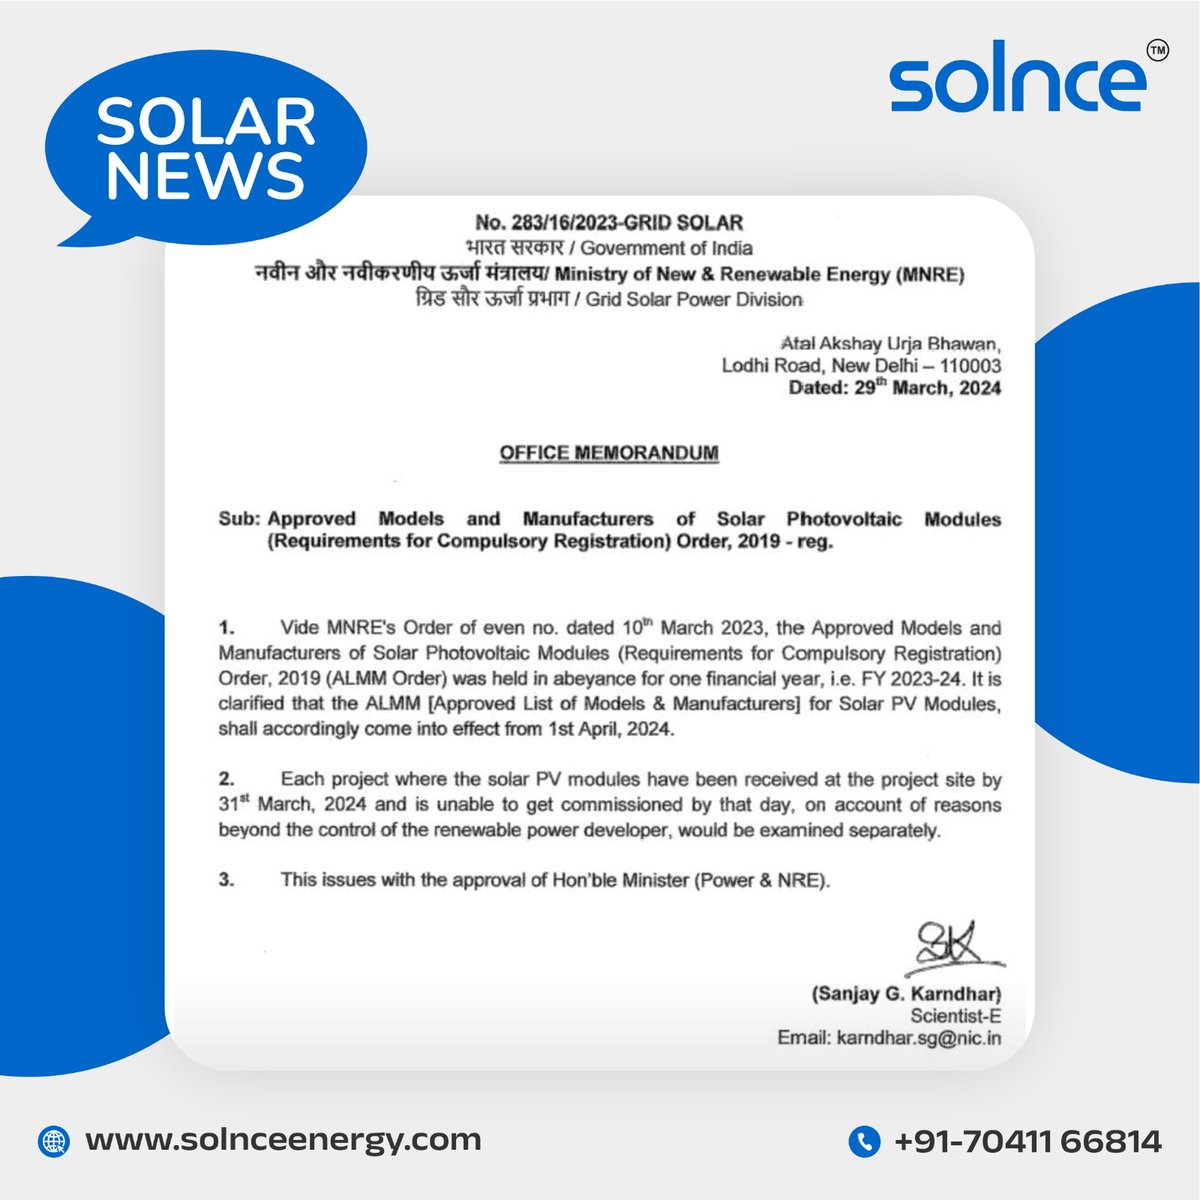 Important Solar Update:

It's time to witness a revolutionary leap into a brighter and more sustainable future!
.
.

#MNRE #solarpower #solarpanel #renewableenergy #solarenergy #subsidy #government #financetips #solarsolutions #PMSuryaGharYojana #HarGharSolar #india #news #Solnce